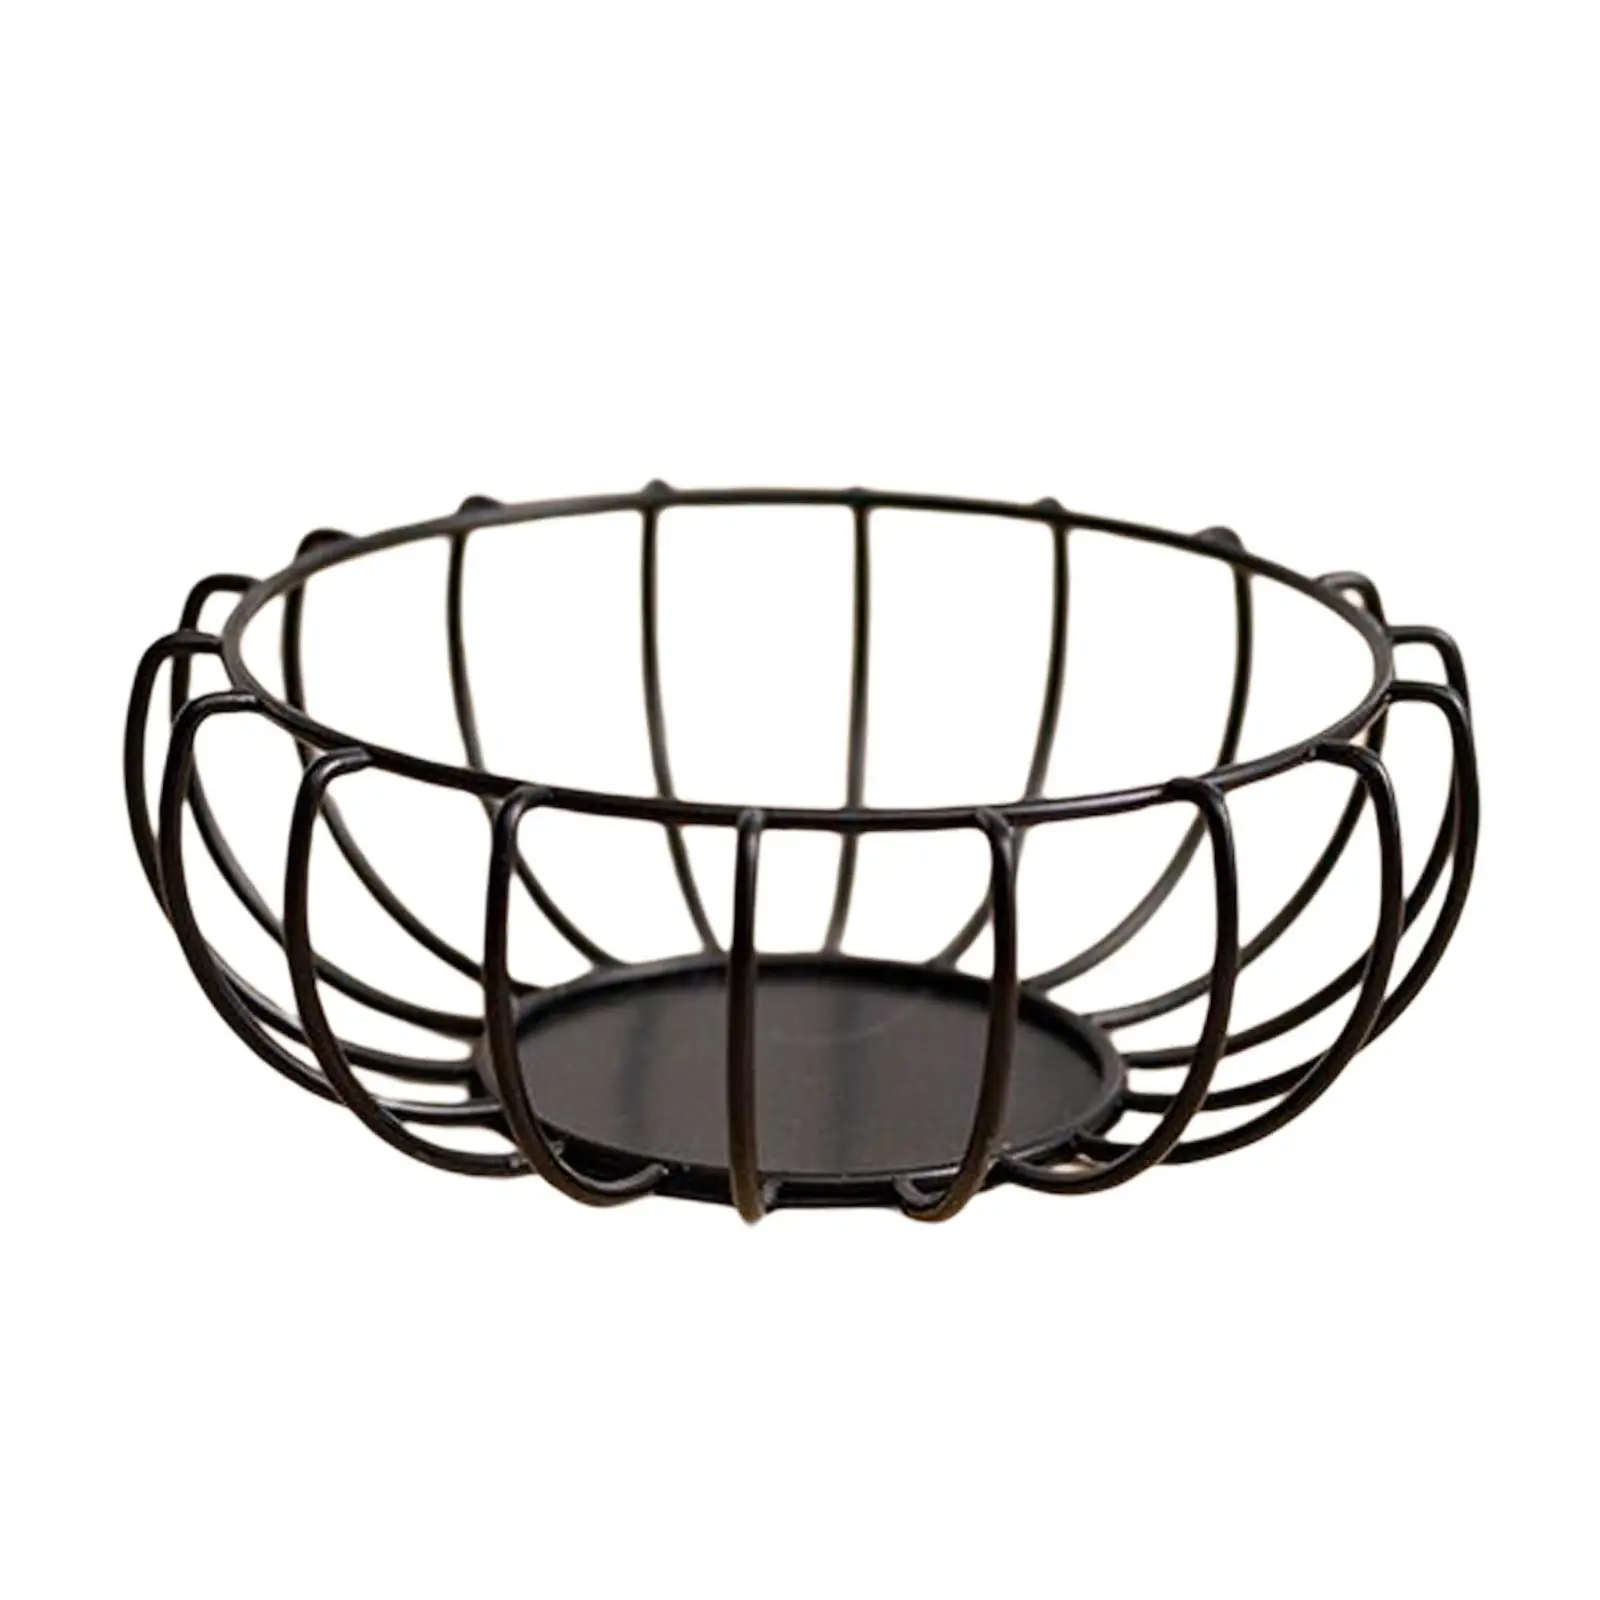 Iron Fruit Basket Bowl Serving Tray Storage Holder Durable Rustproof Decorative Modern for Onion Eggs Office Kitchen Tabletop